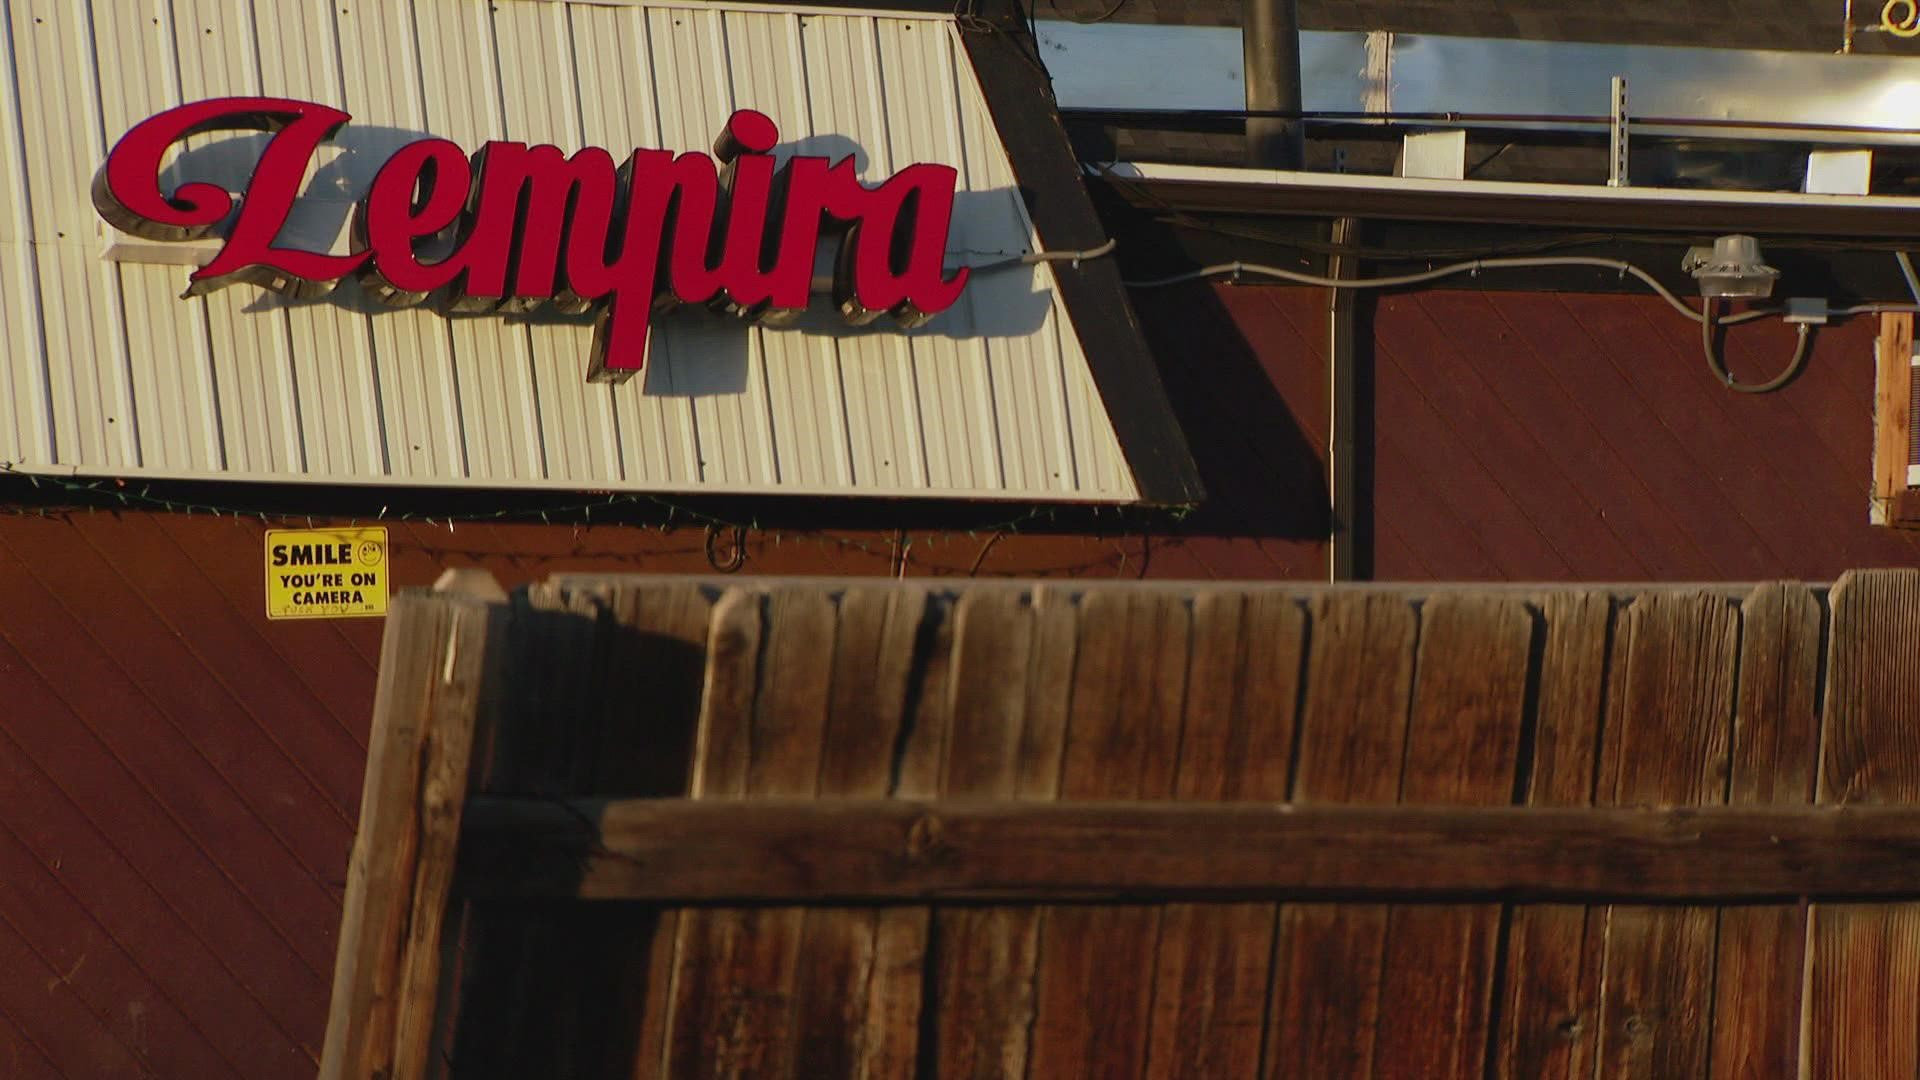 Lempira restaurant and bar has a history of hiring unlicensed security guards, records show. One of them was involved in a fatal shooting over the weekend, DPD said.